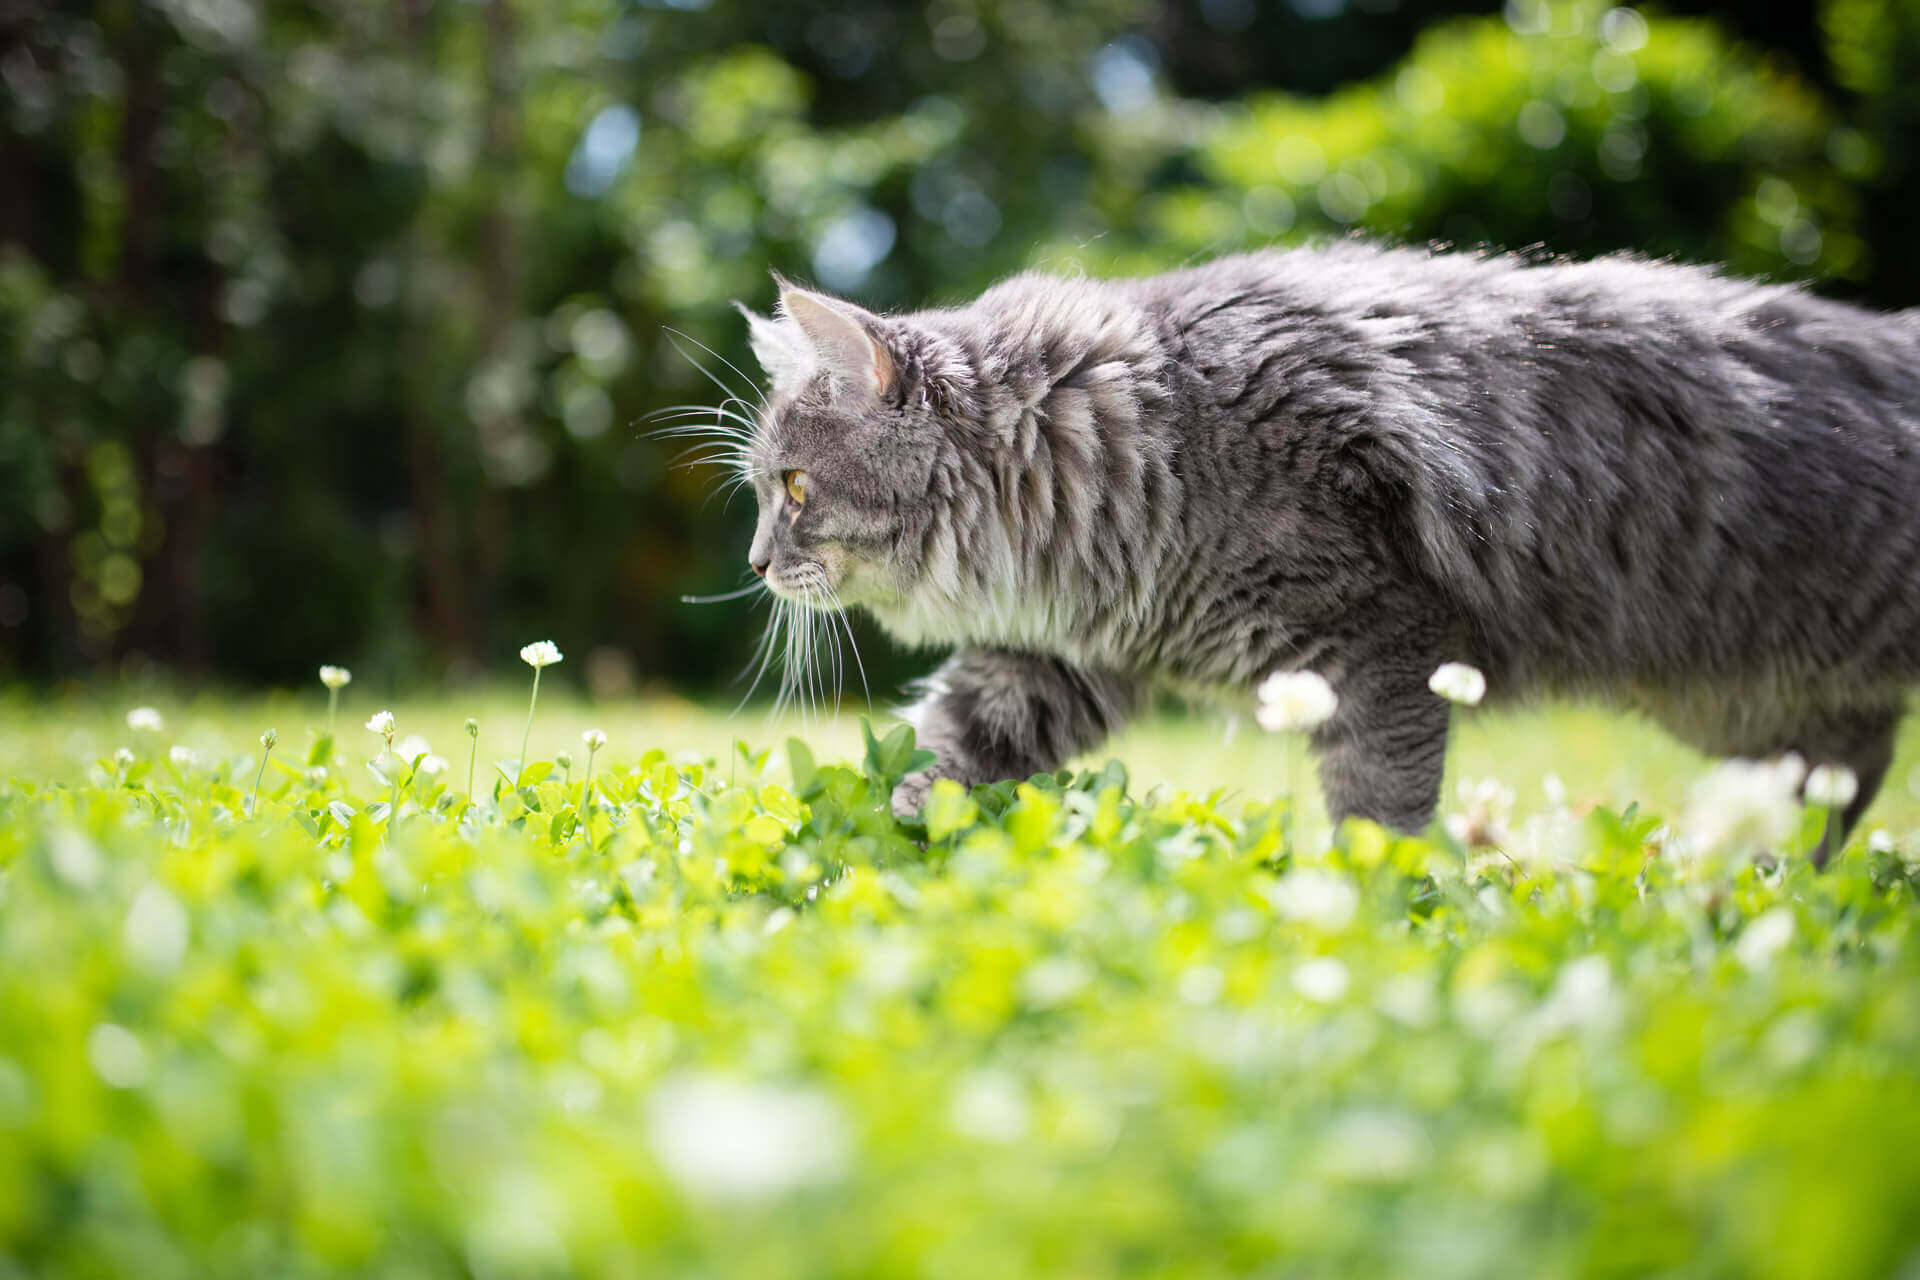 Ticks On Cats: Prevention, Symptoms And How To Get Rid Of Ticks On Cats Safely